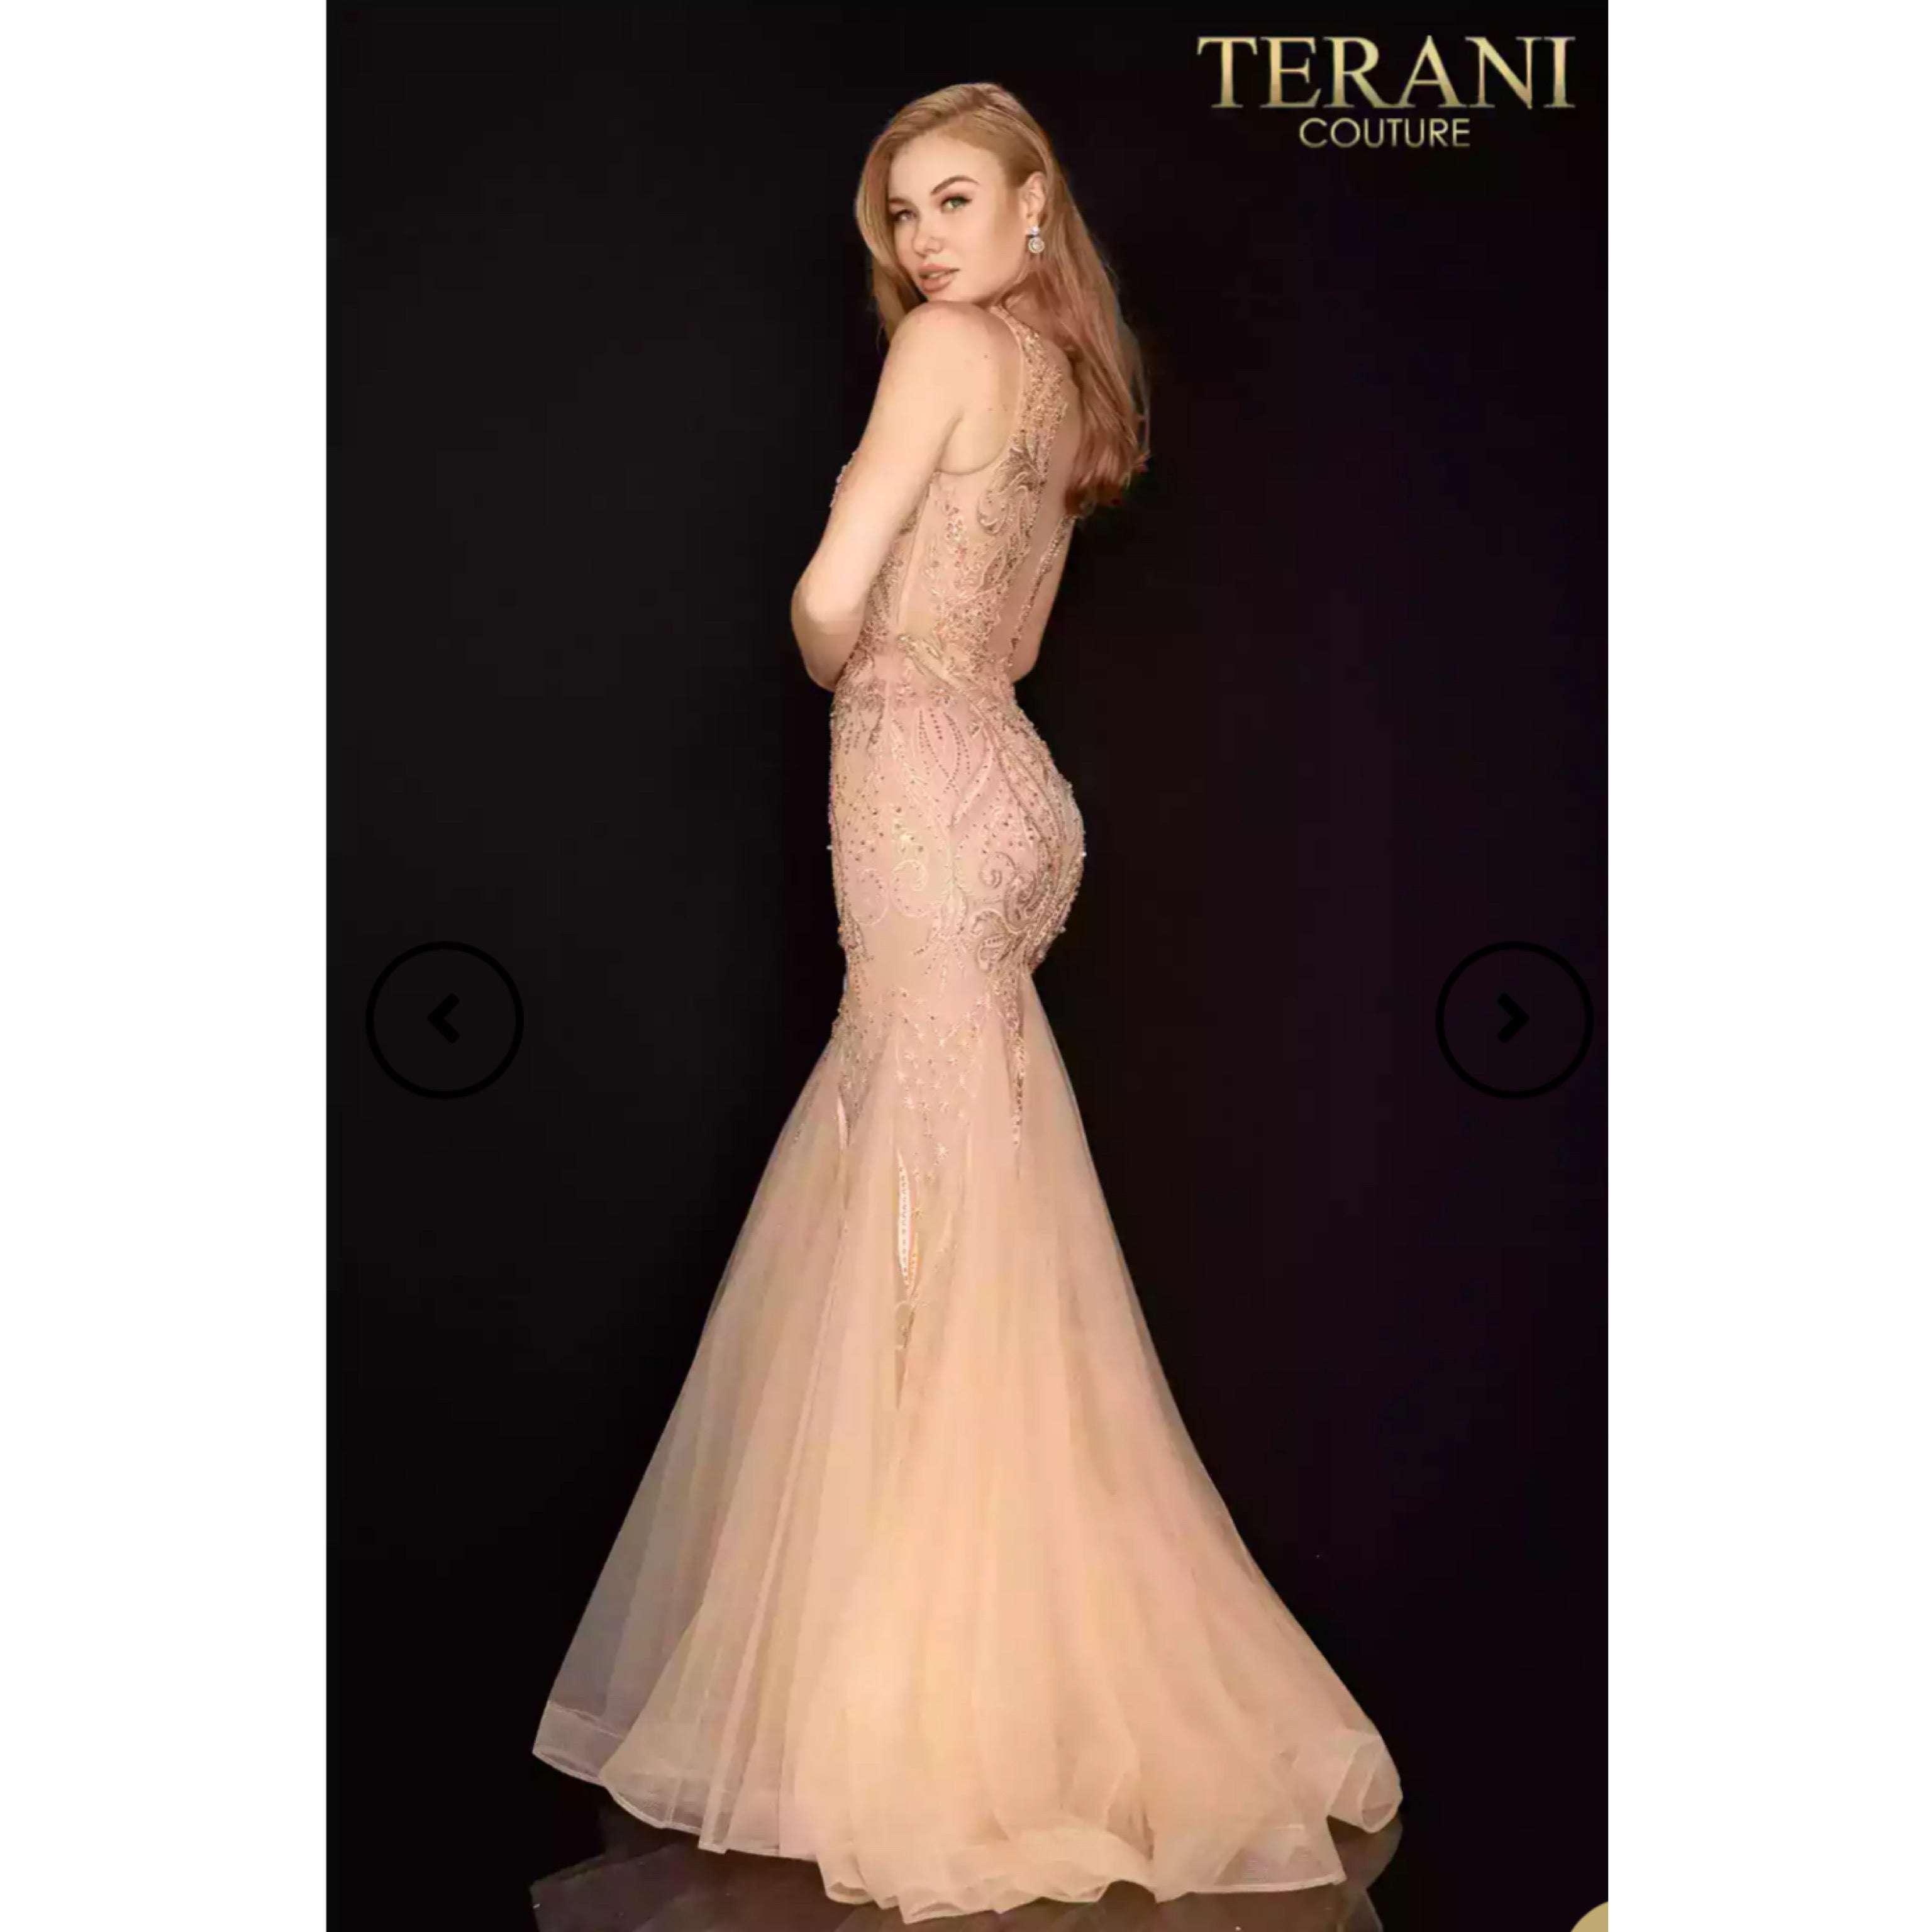 Terani rose gold dress, size 10, NEW WITH TAGS!